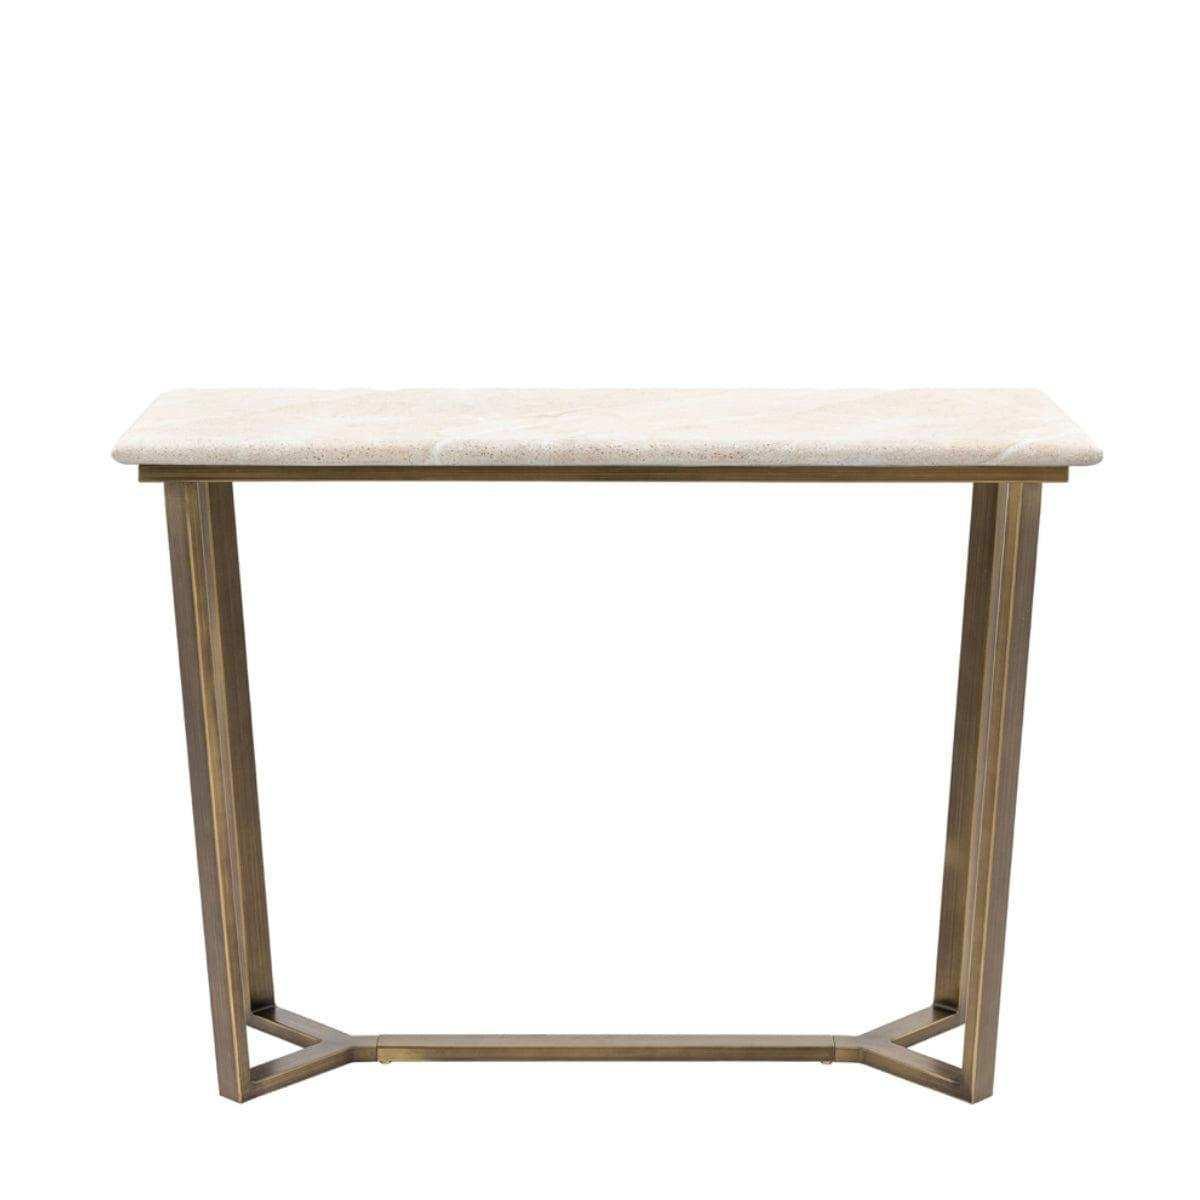 Faux Travertine Topped Antique Bronze Legged Console Table - The Farthing